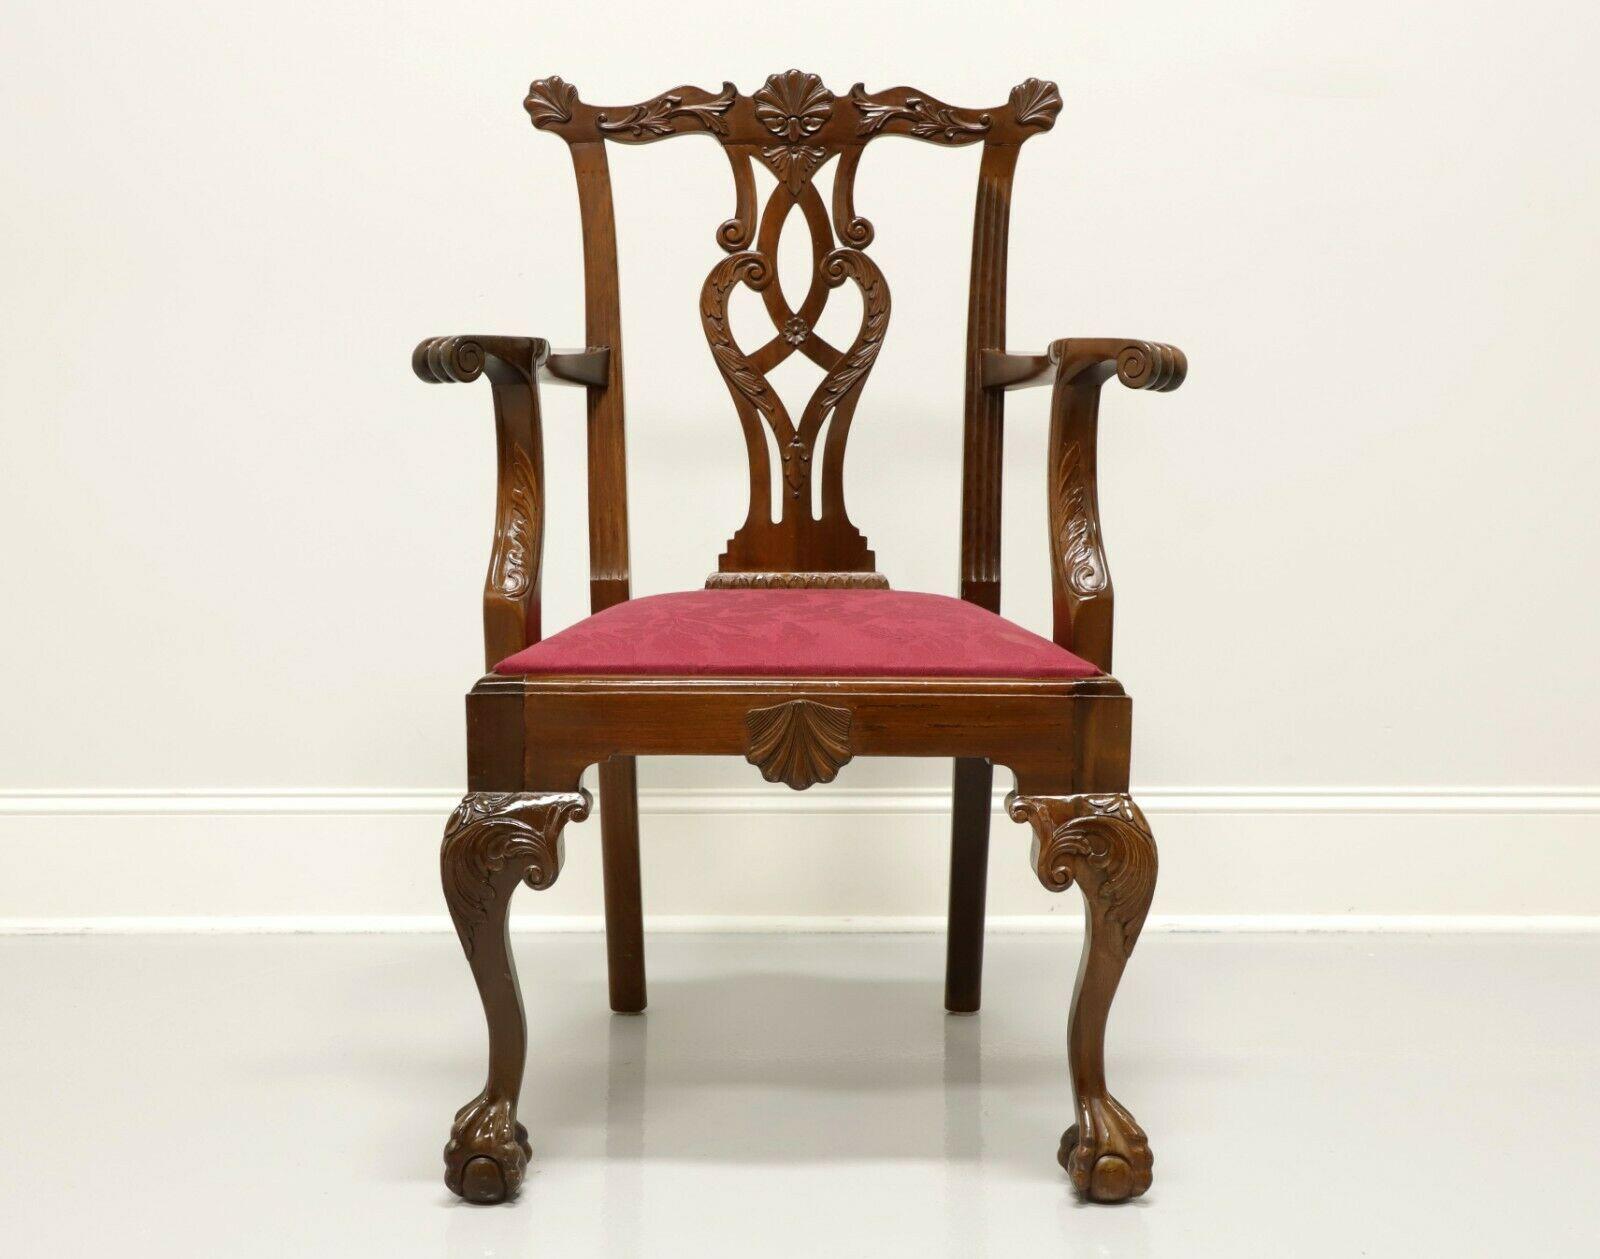 An antique Chippendale style armchair, unbranded. Solid mahogany with carved crest rail, back splat, arms, knees, ball in claw feet and crimson red brocade fabric upholstered seat. Possibly made in the USA, in the late 19th Century.

Measures: